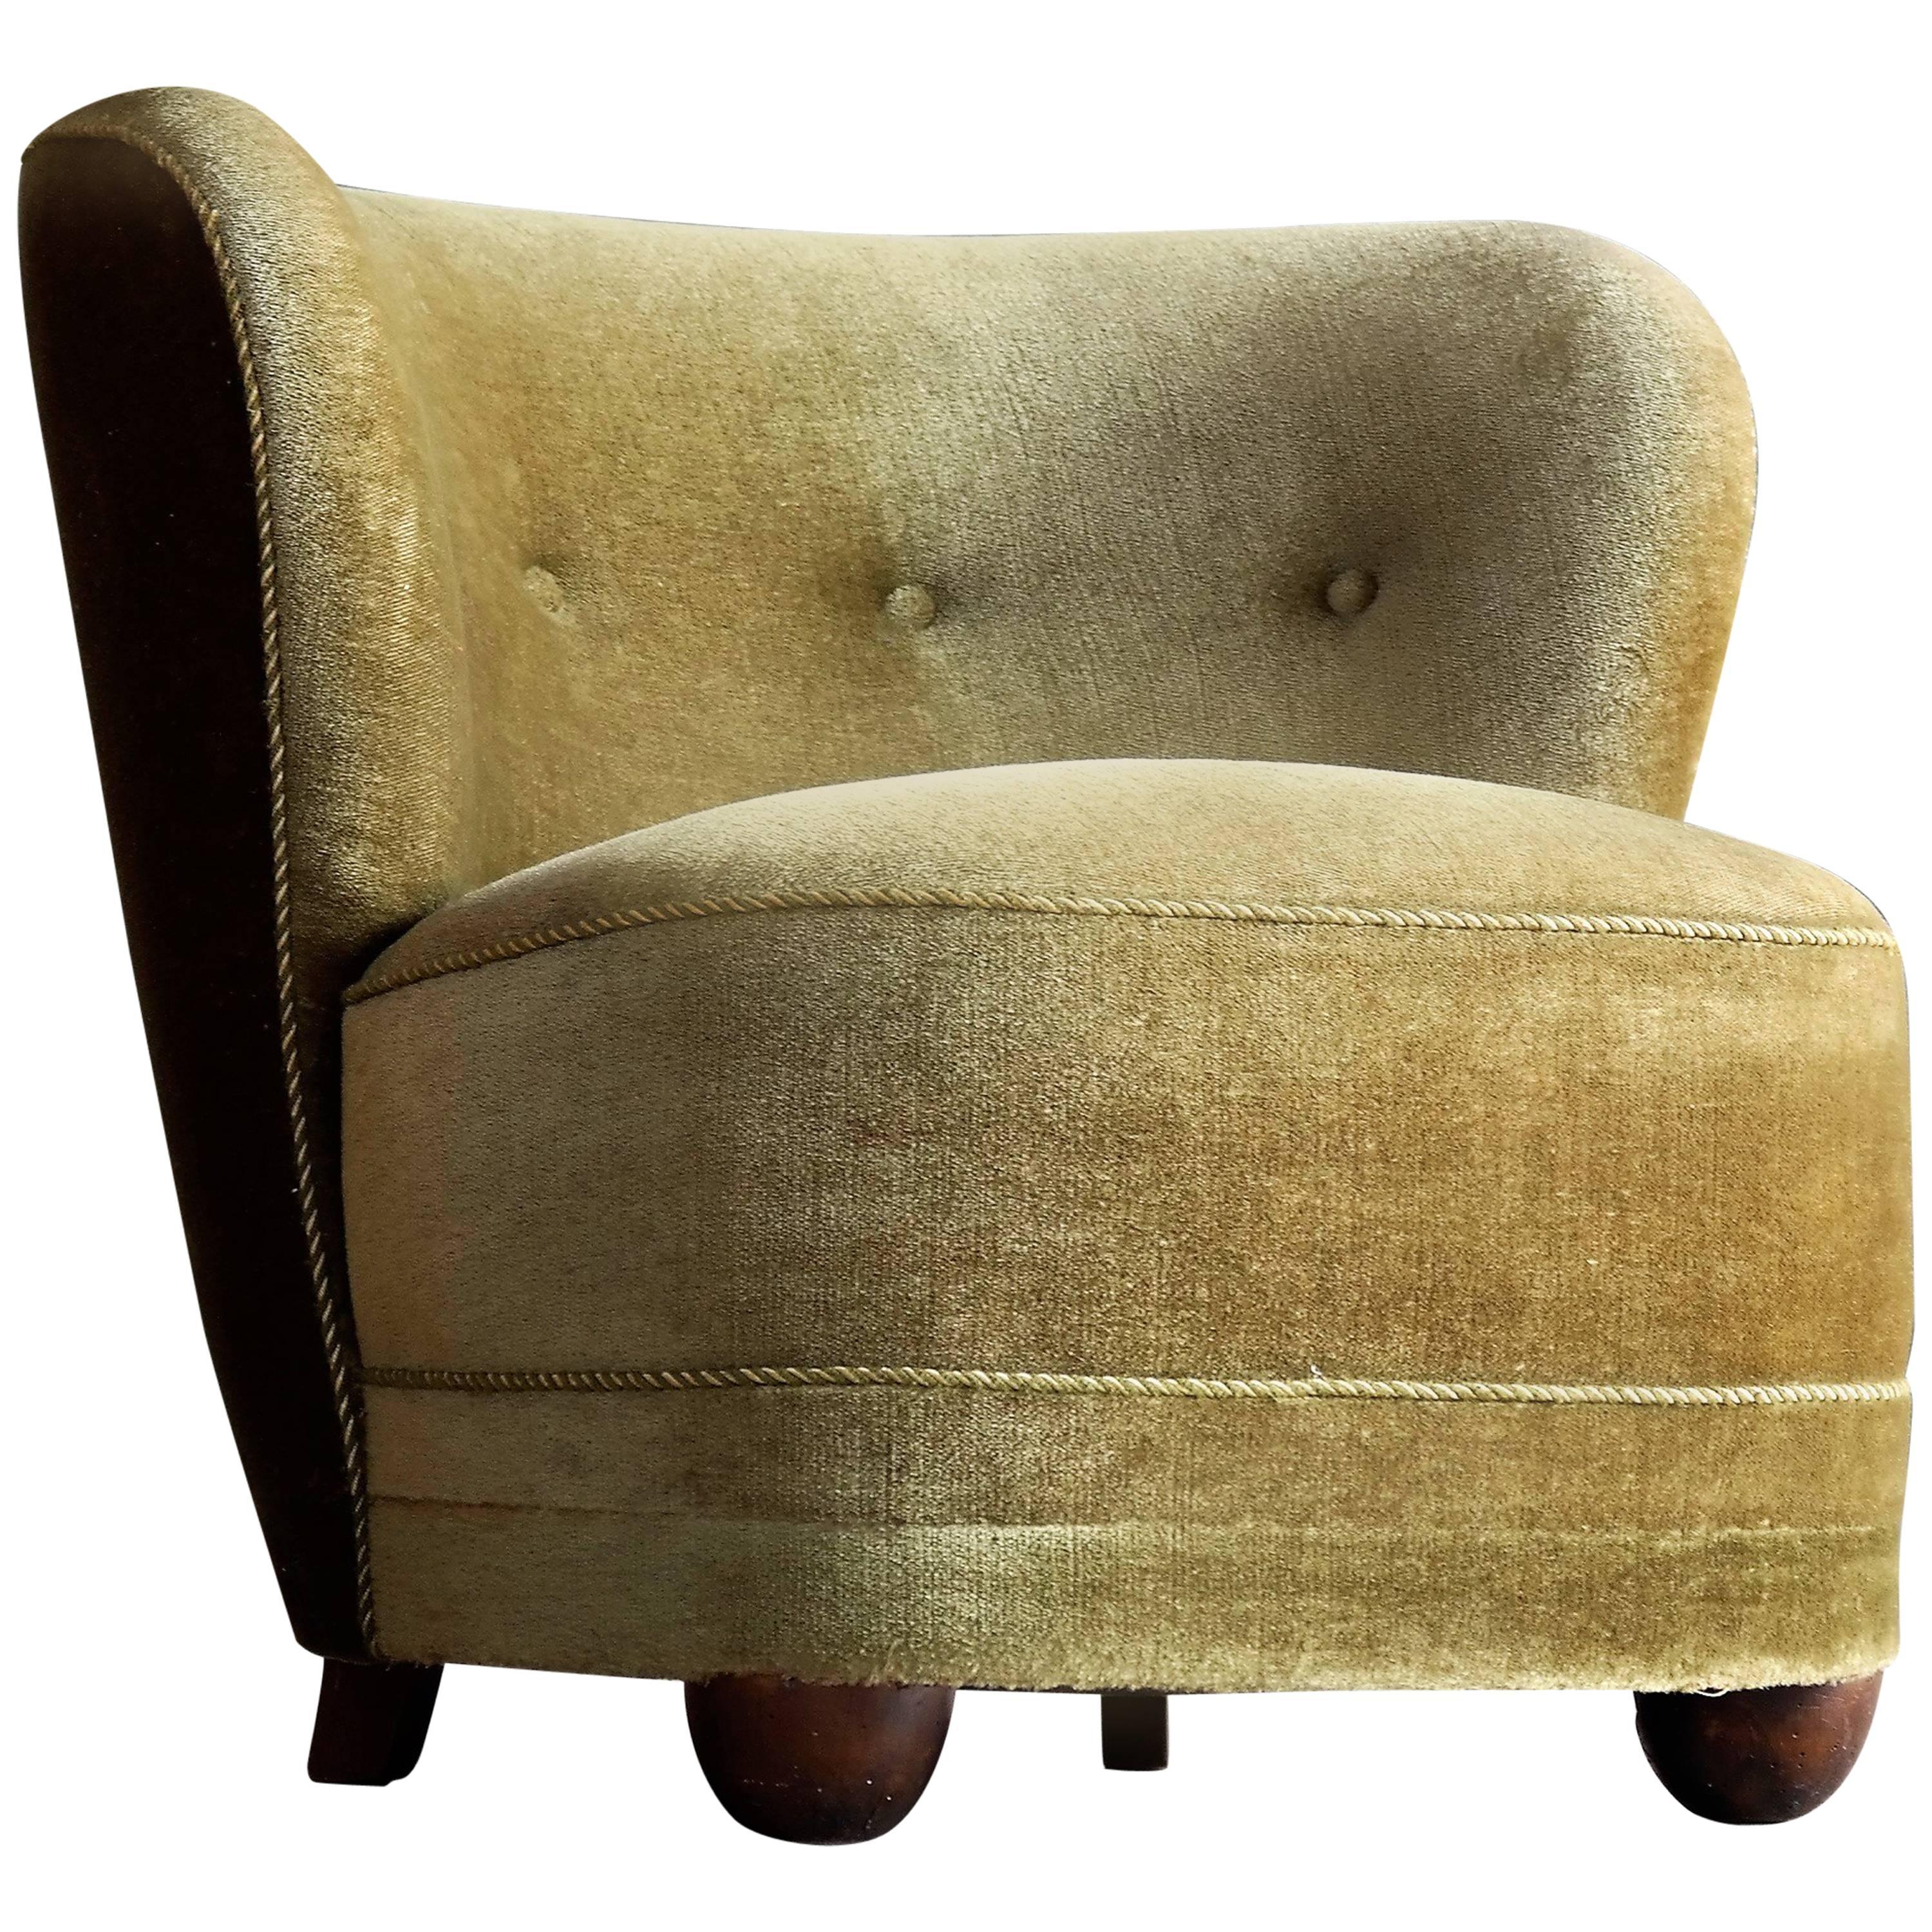 Viggo Boesen Attributed, 1940s Lounge or Slipper Chair in Mohair